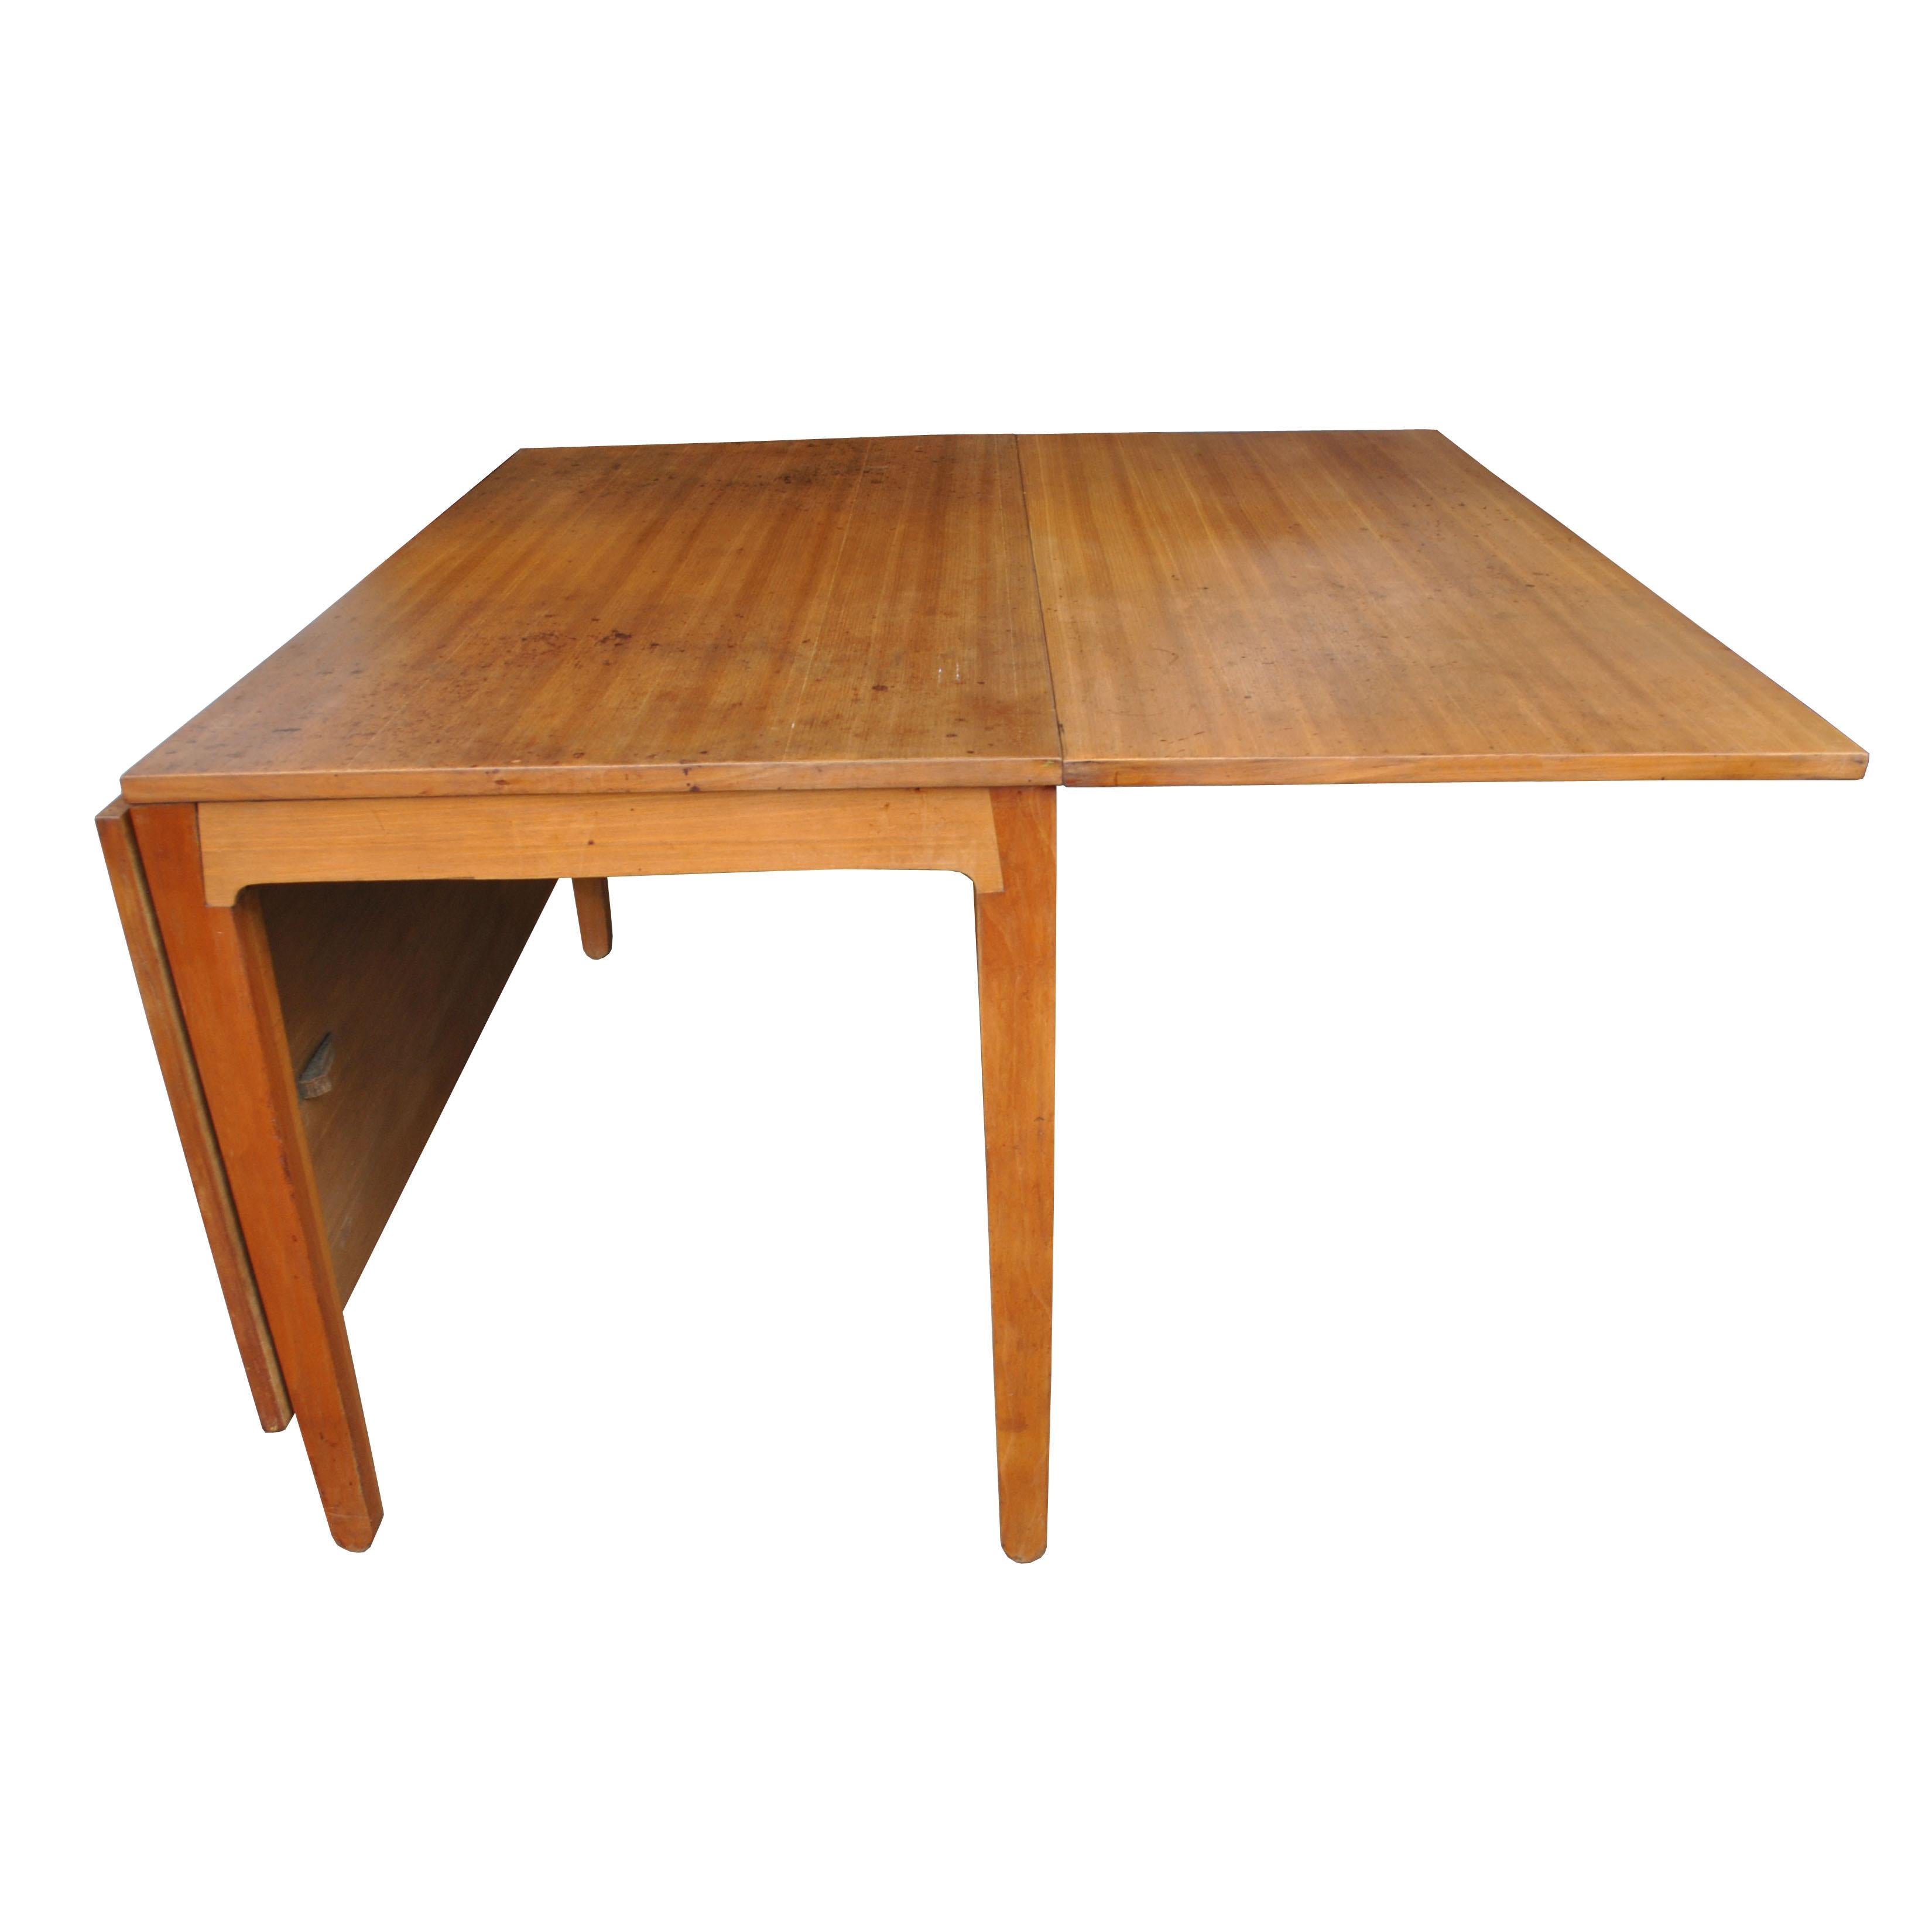 Mid-20th Century Edward Wormley for Drexel Drop-Leaf Precedent Dining Table For Sale